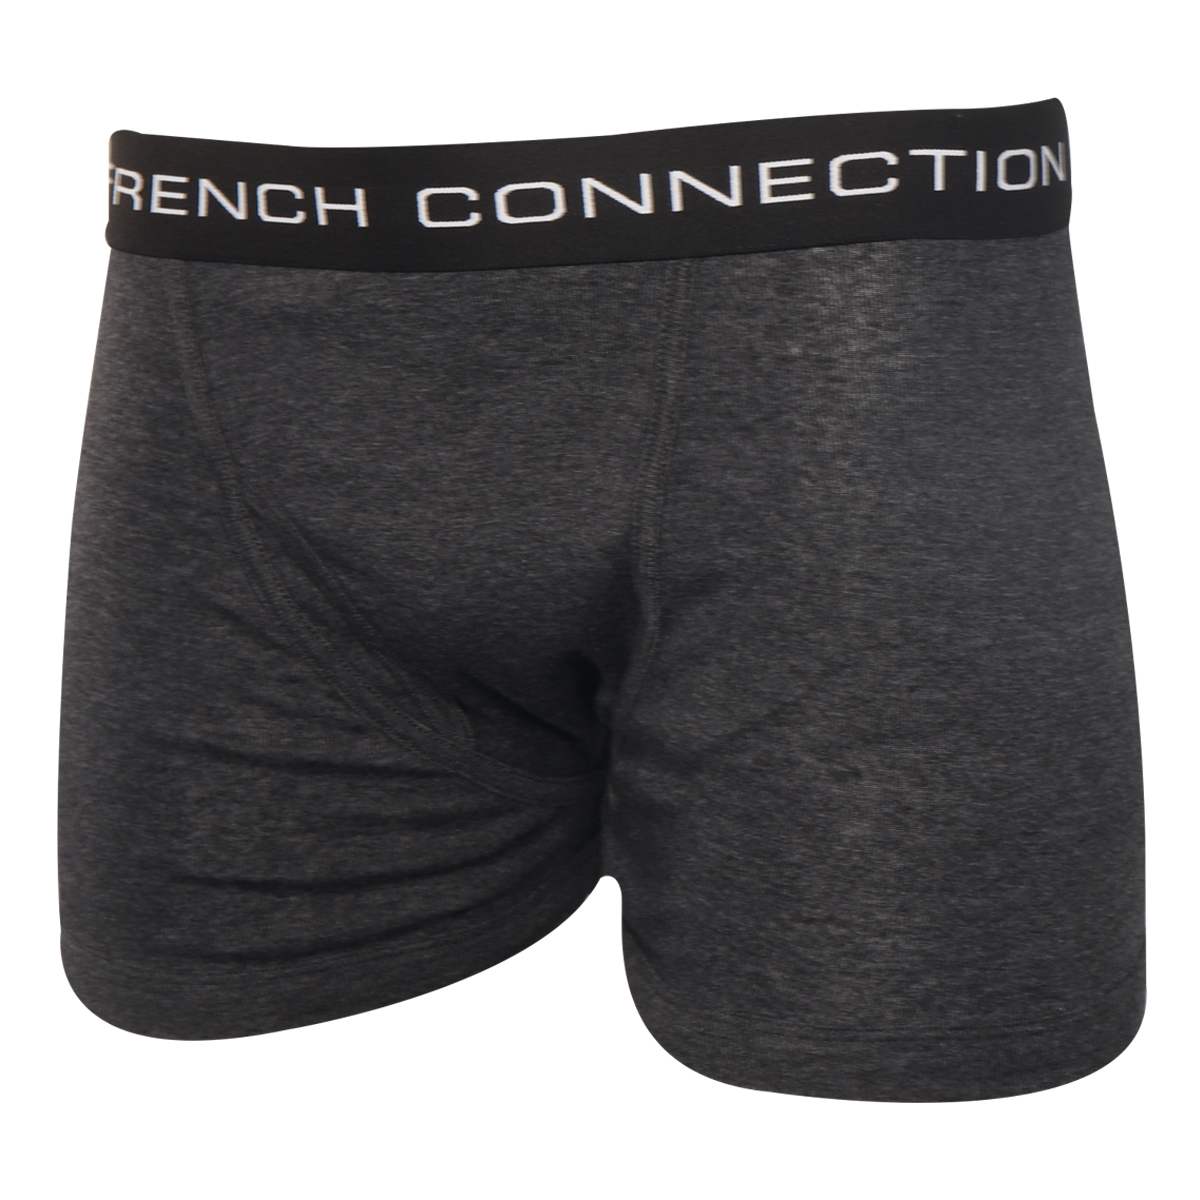 French Connection Men's Boxer Brief Single Pack Charcoal Grey (S32)